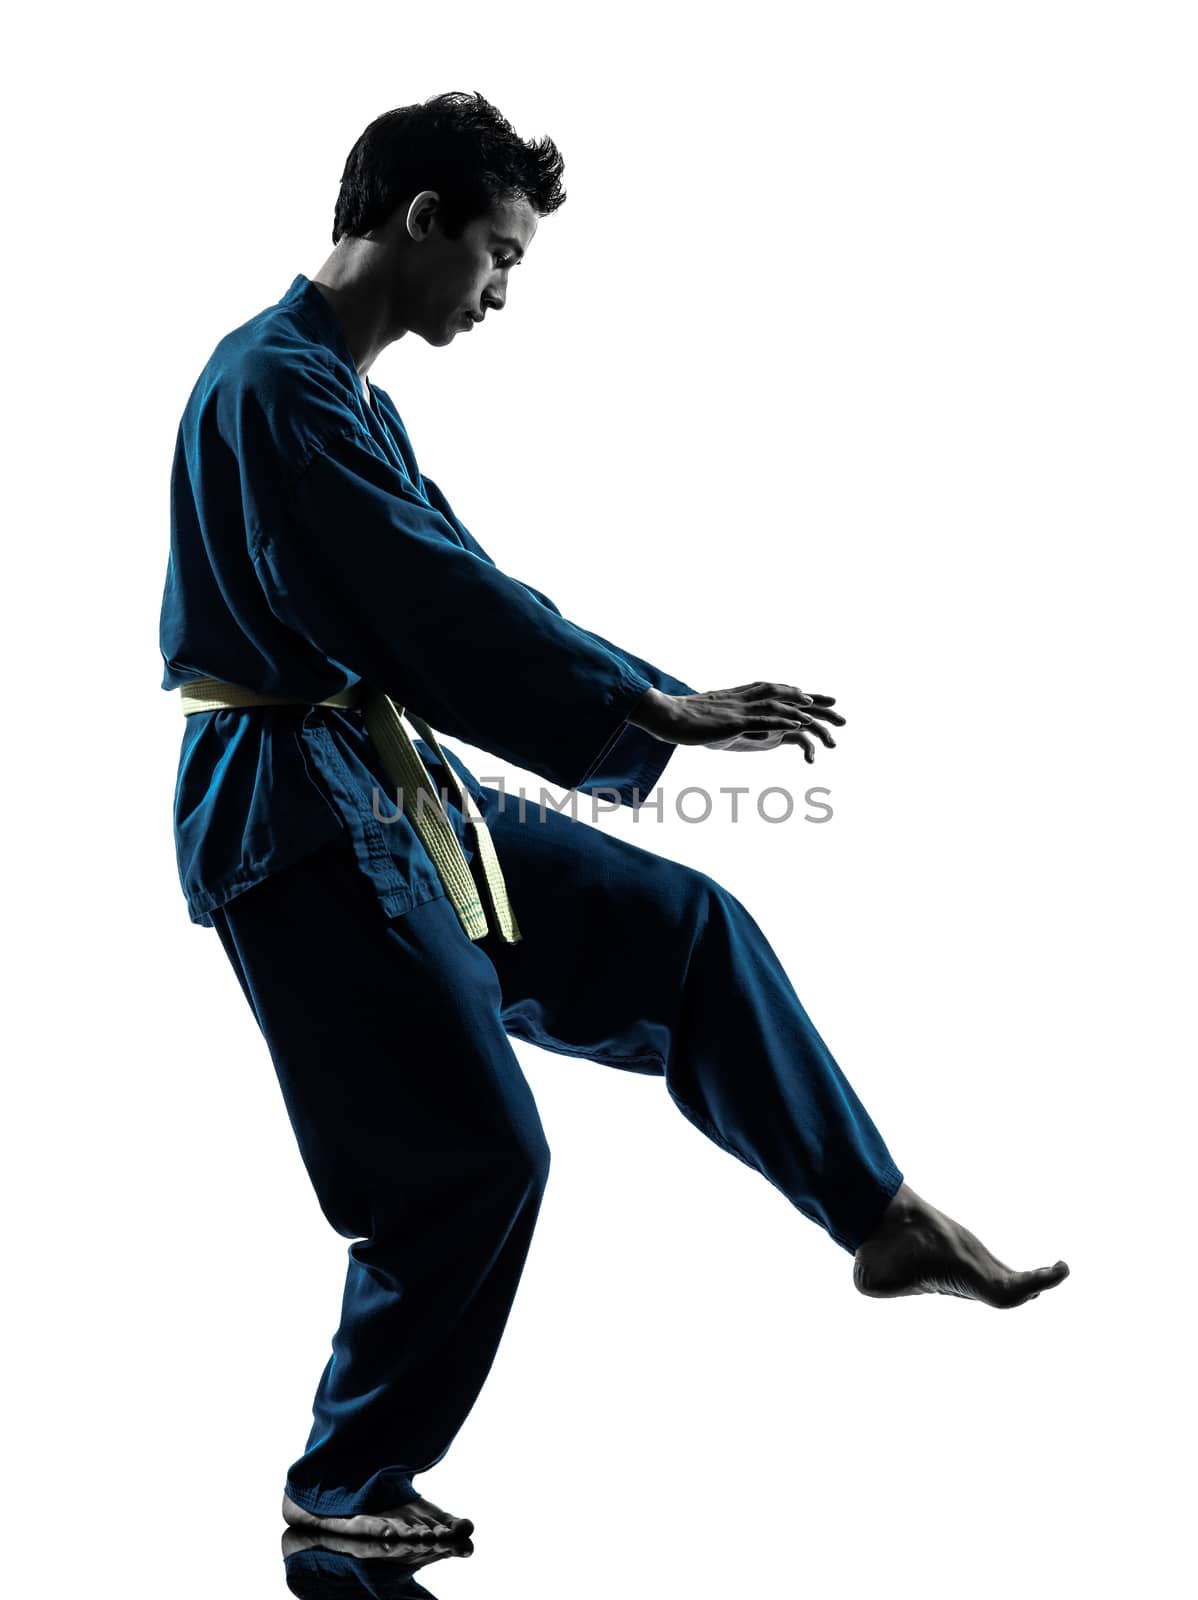 one asian young man exercising martial arts karate vietvodao in silhouette studio isolated on white background